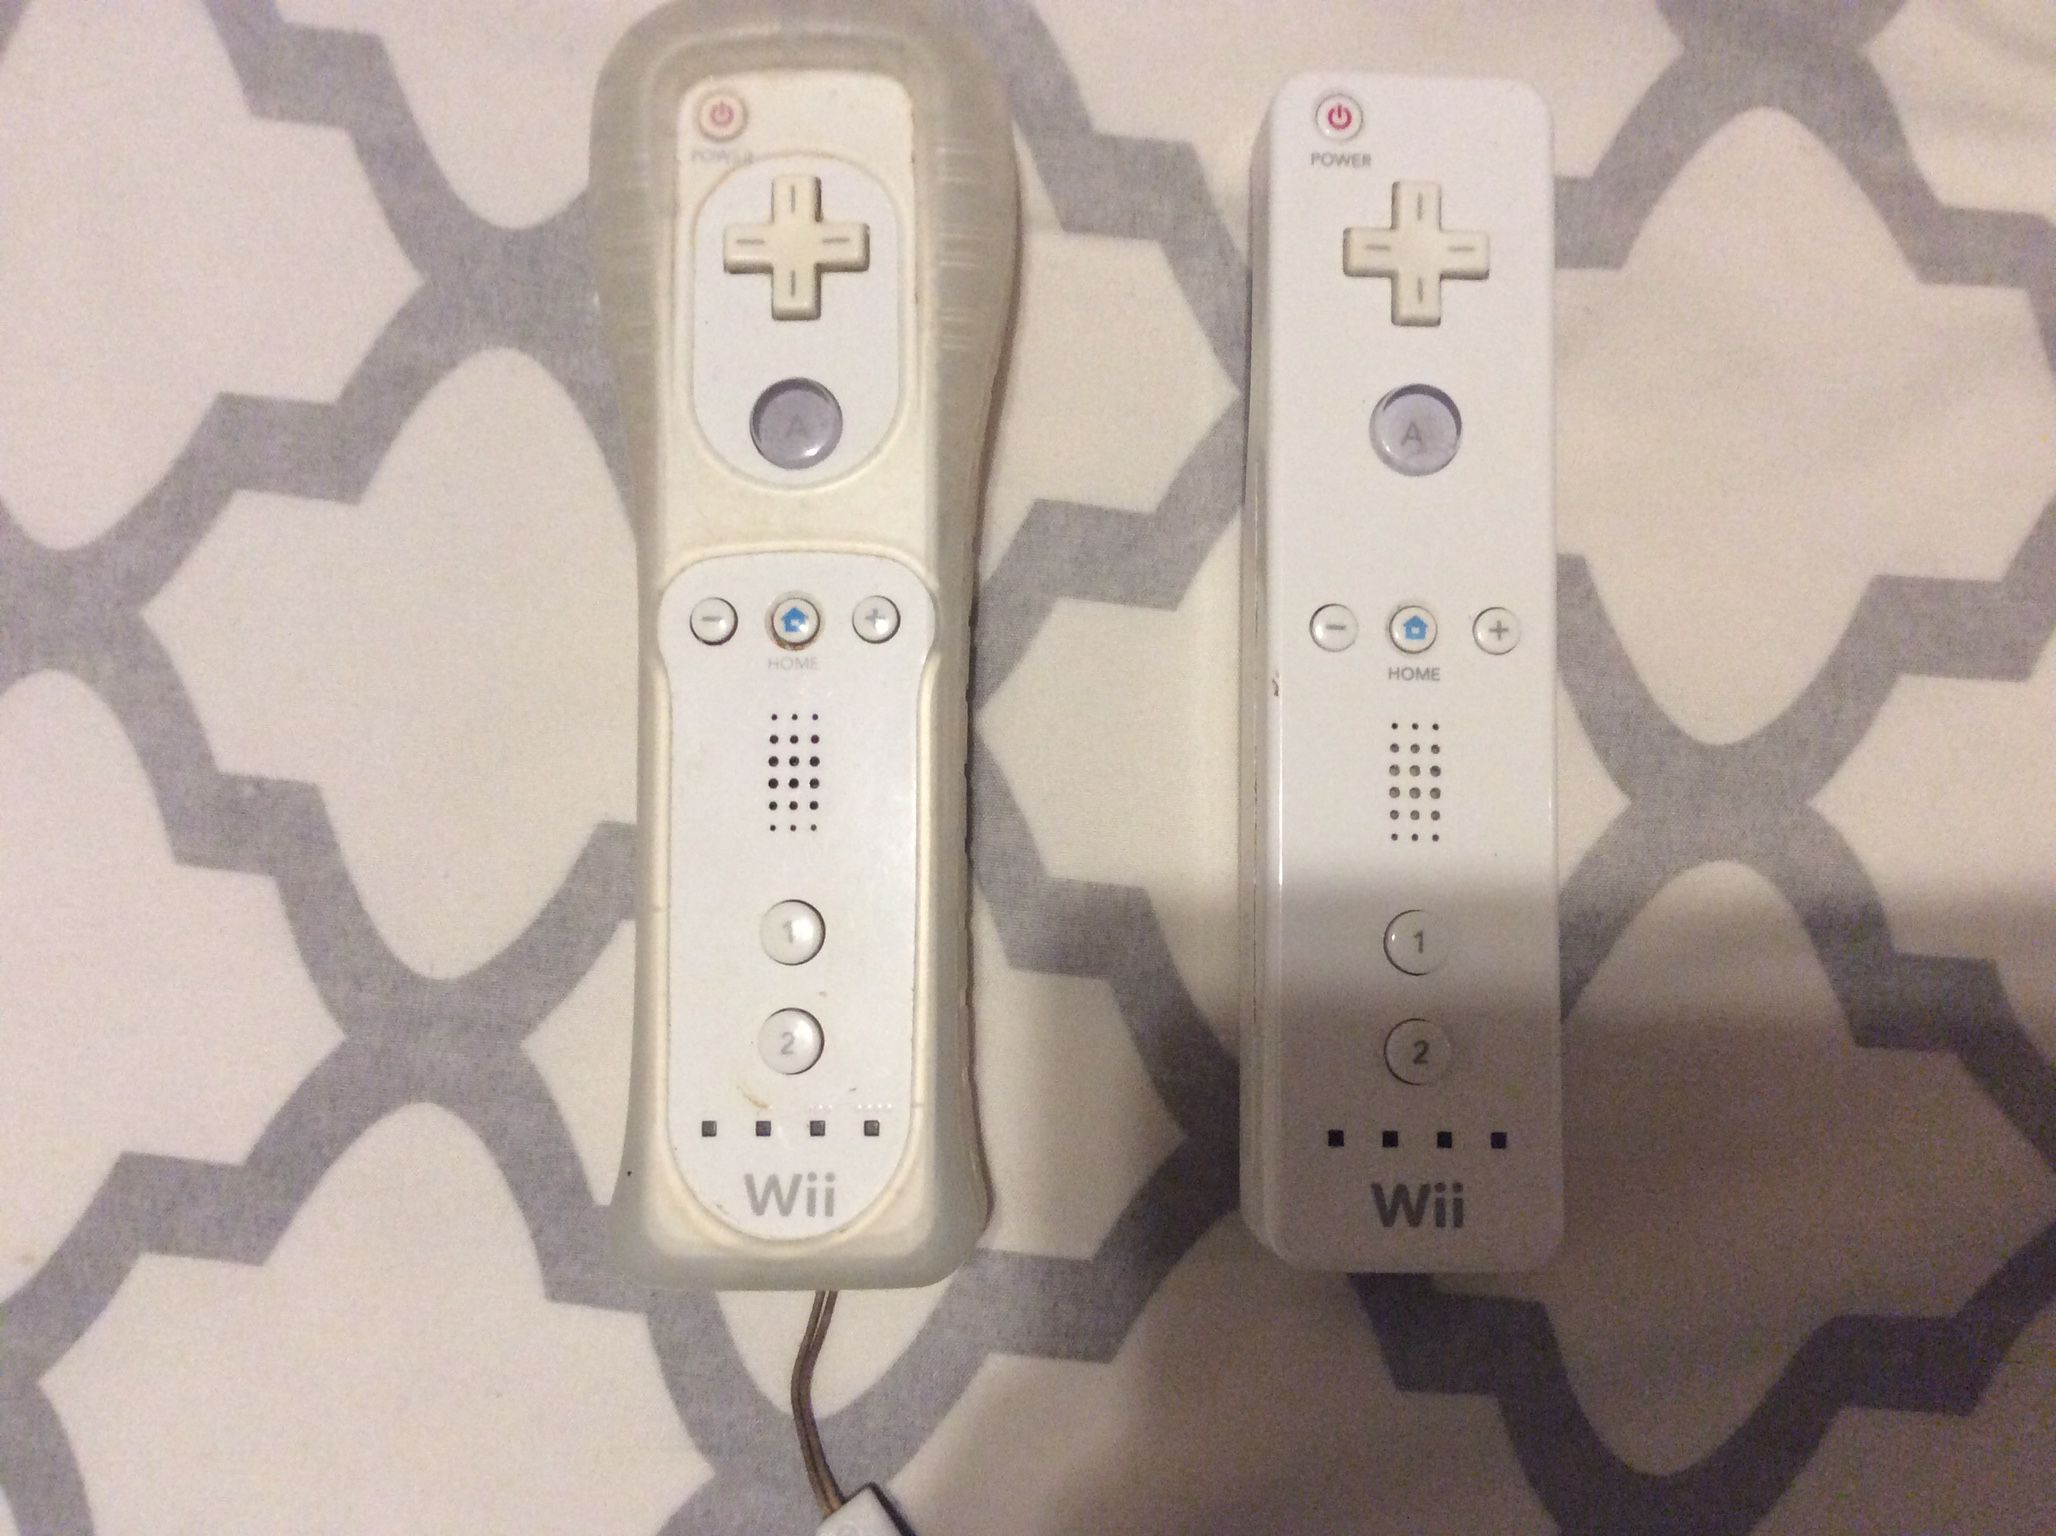 2 Pcs Of Wii  remote For $25